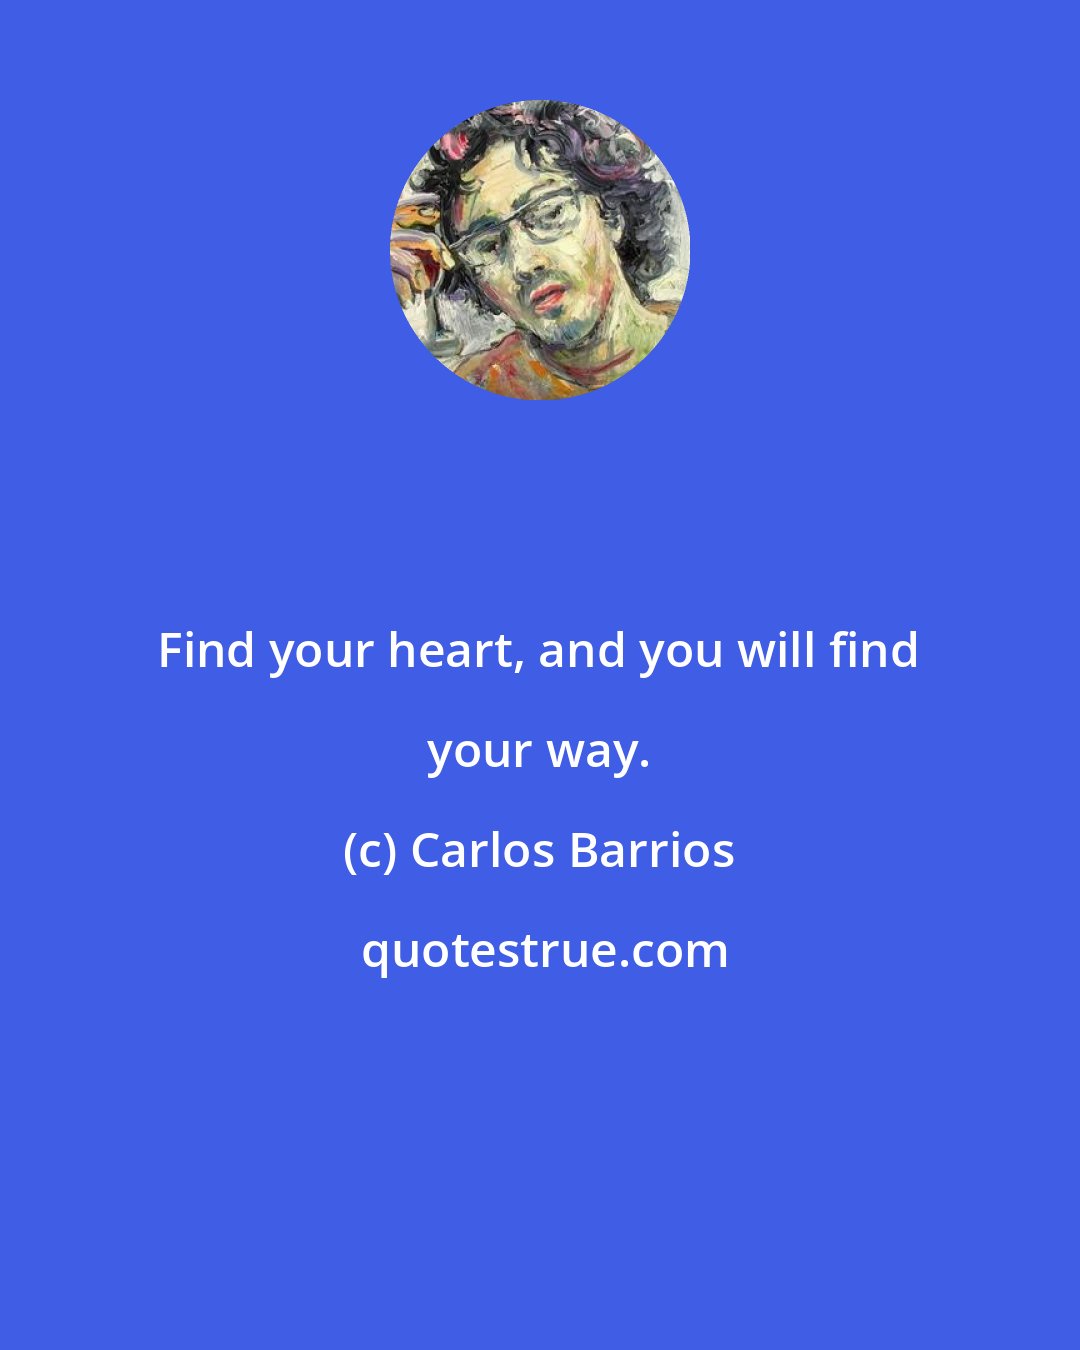 Carlos Barrios: Find your heart, and you will find your way.